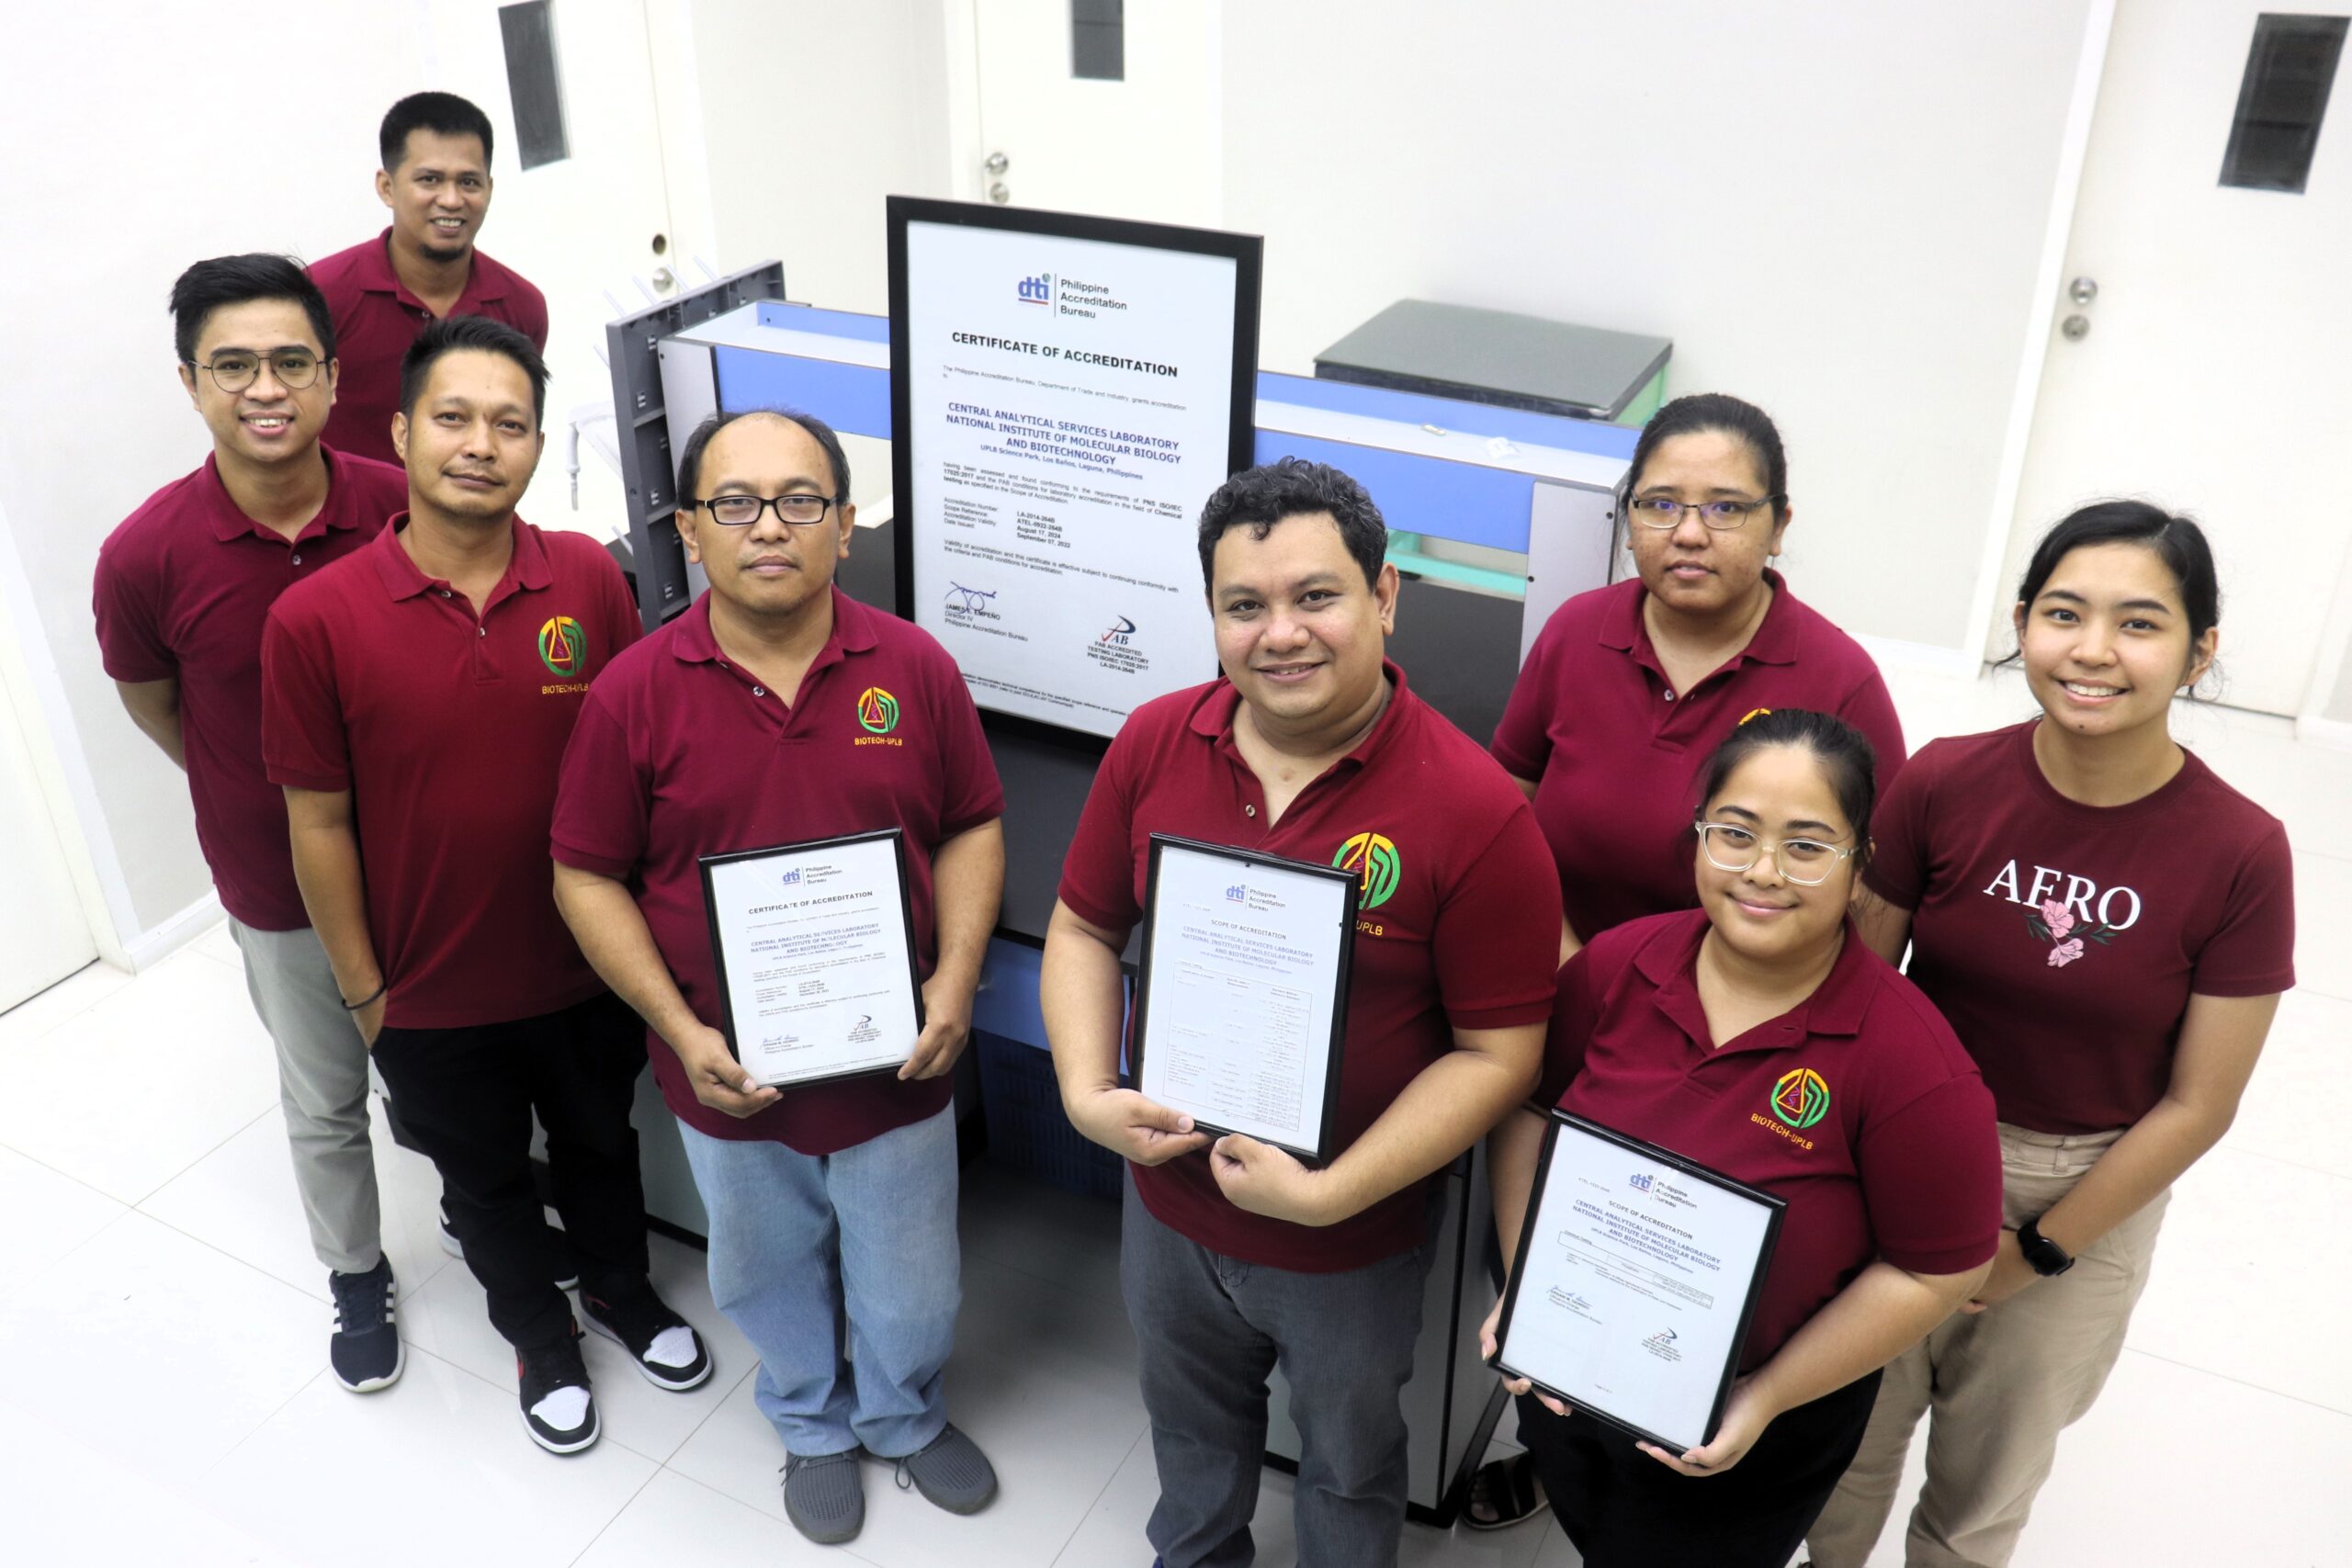 BIOTECH’s Central Analytical Service Laboratory reaches a decade of ISO accreditation